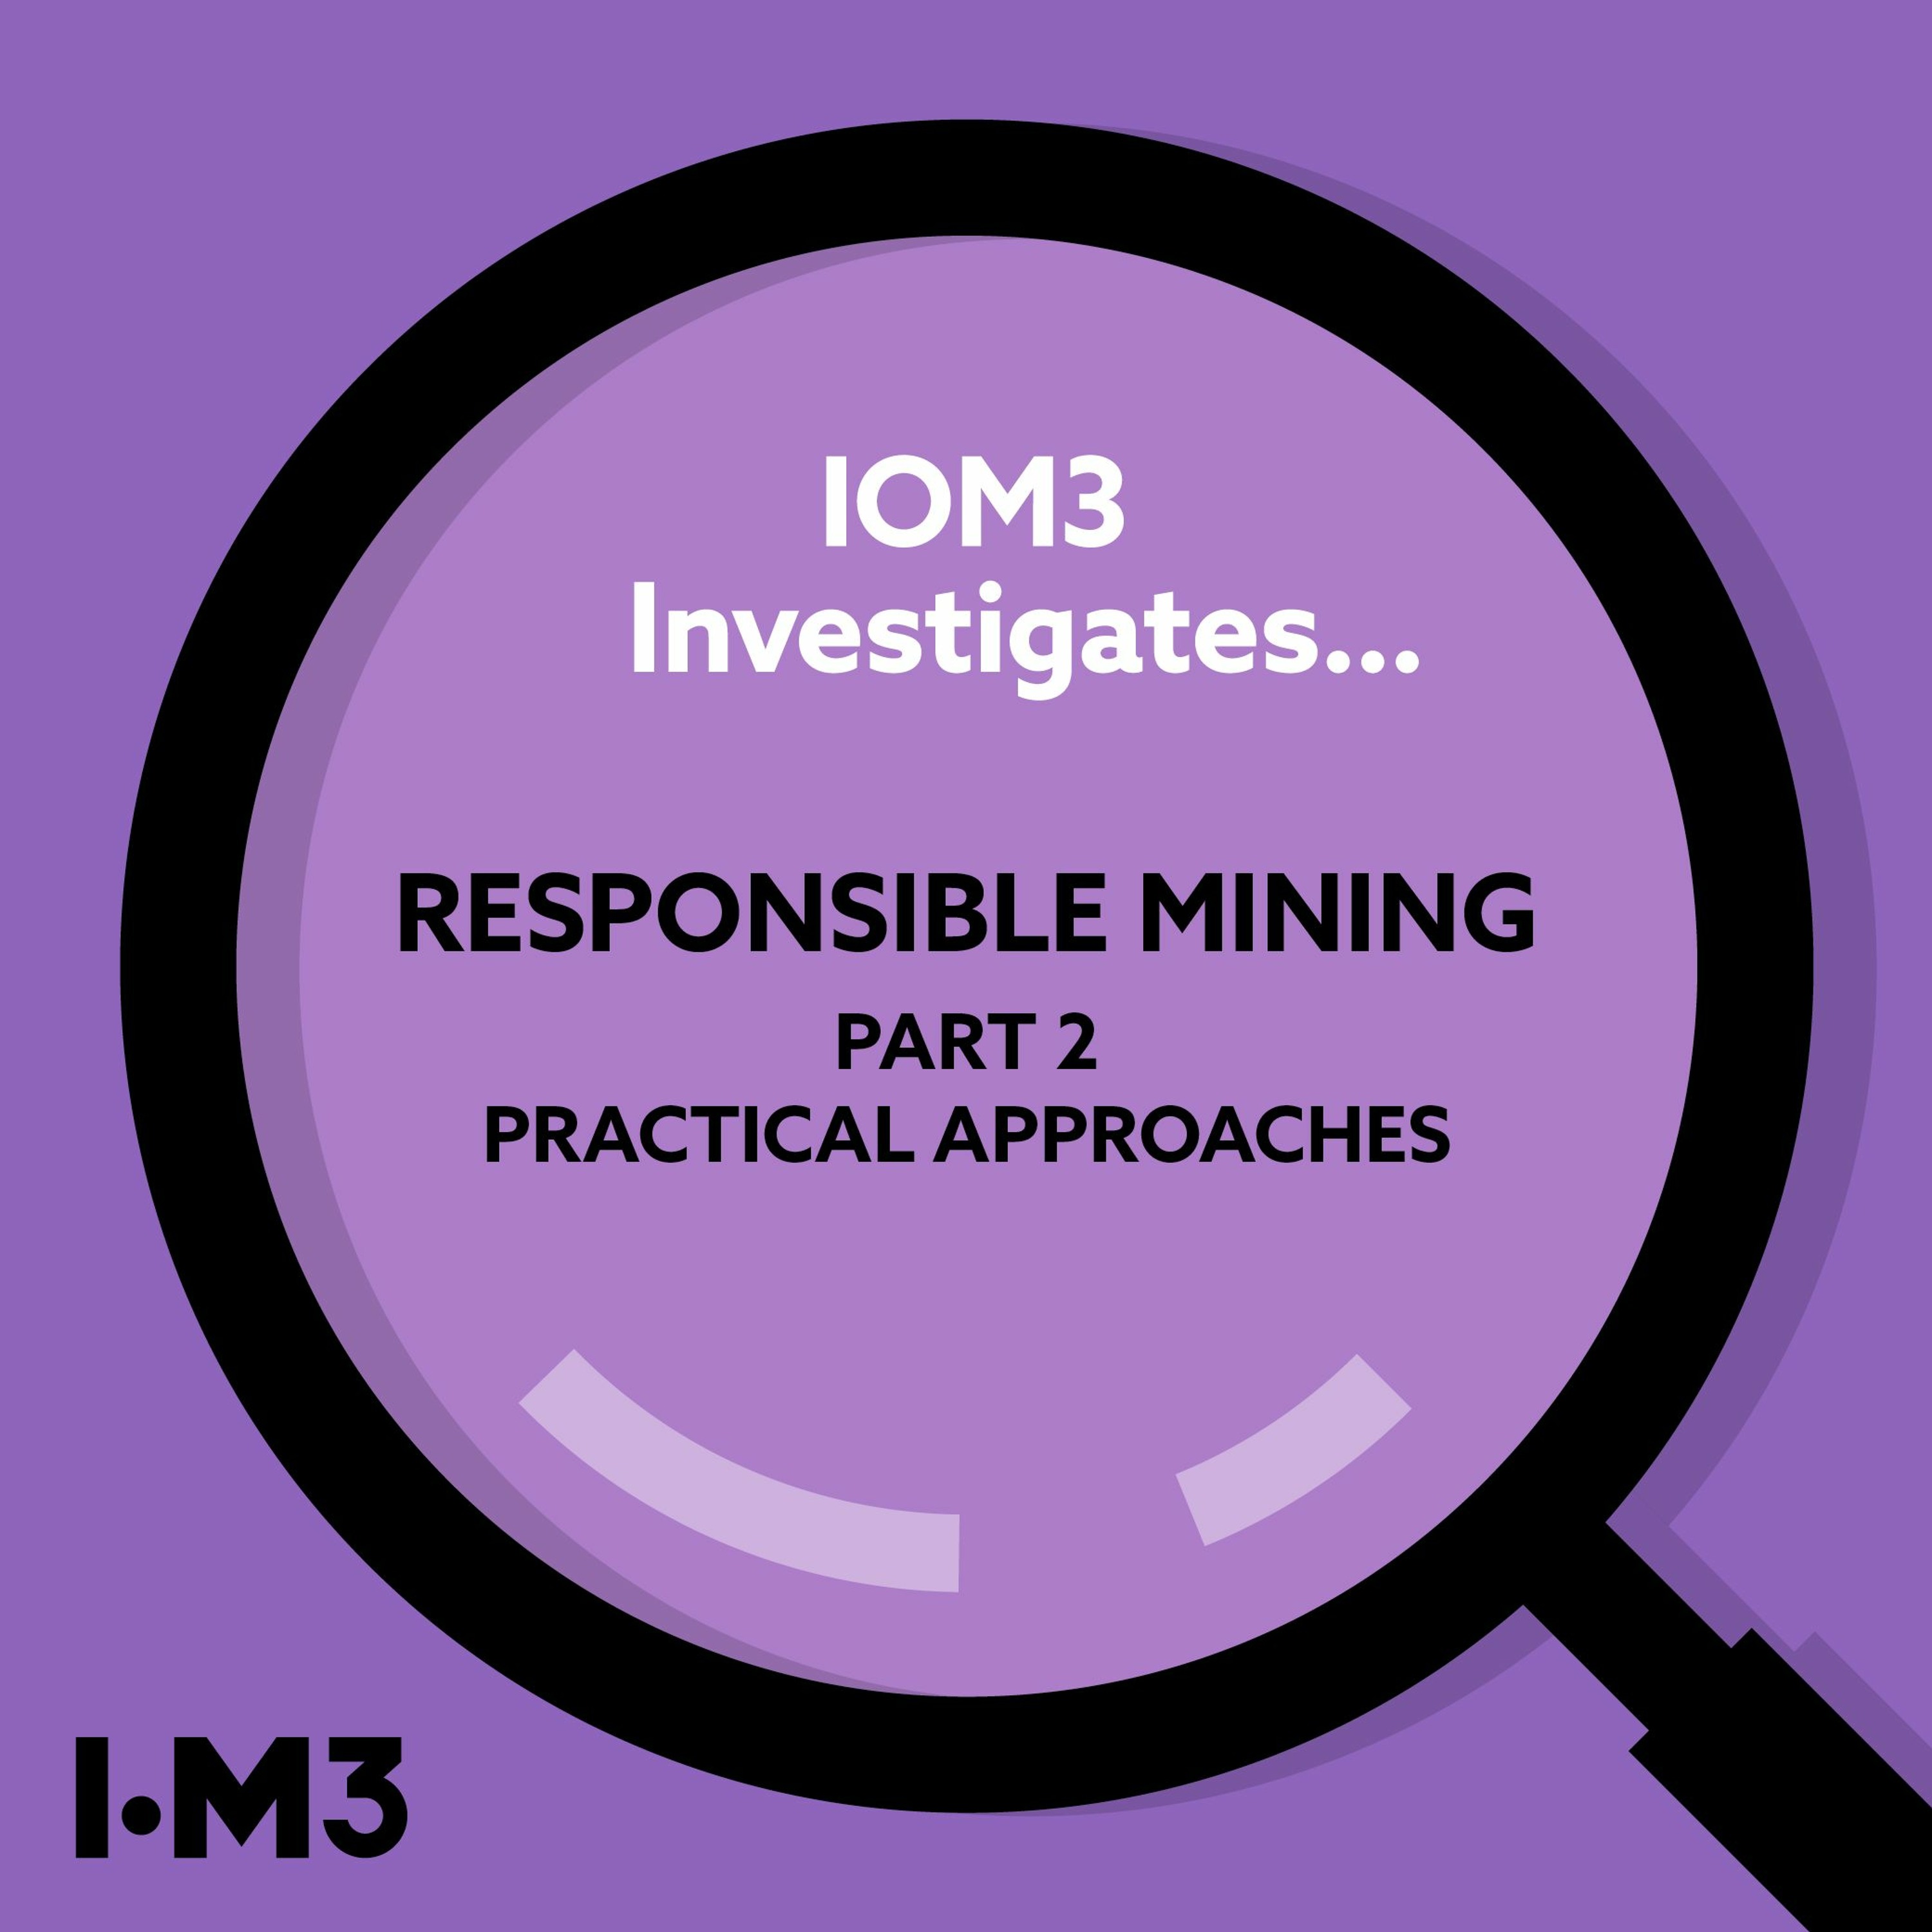 Responsible Mining Part 2 - Practical Approaches